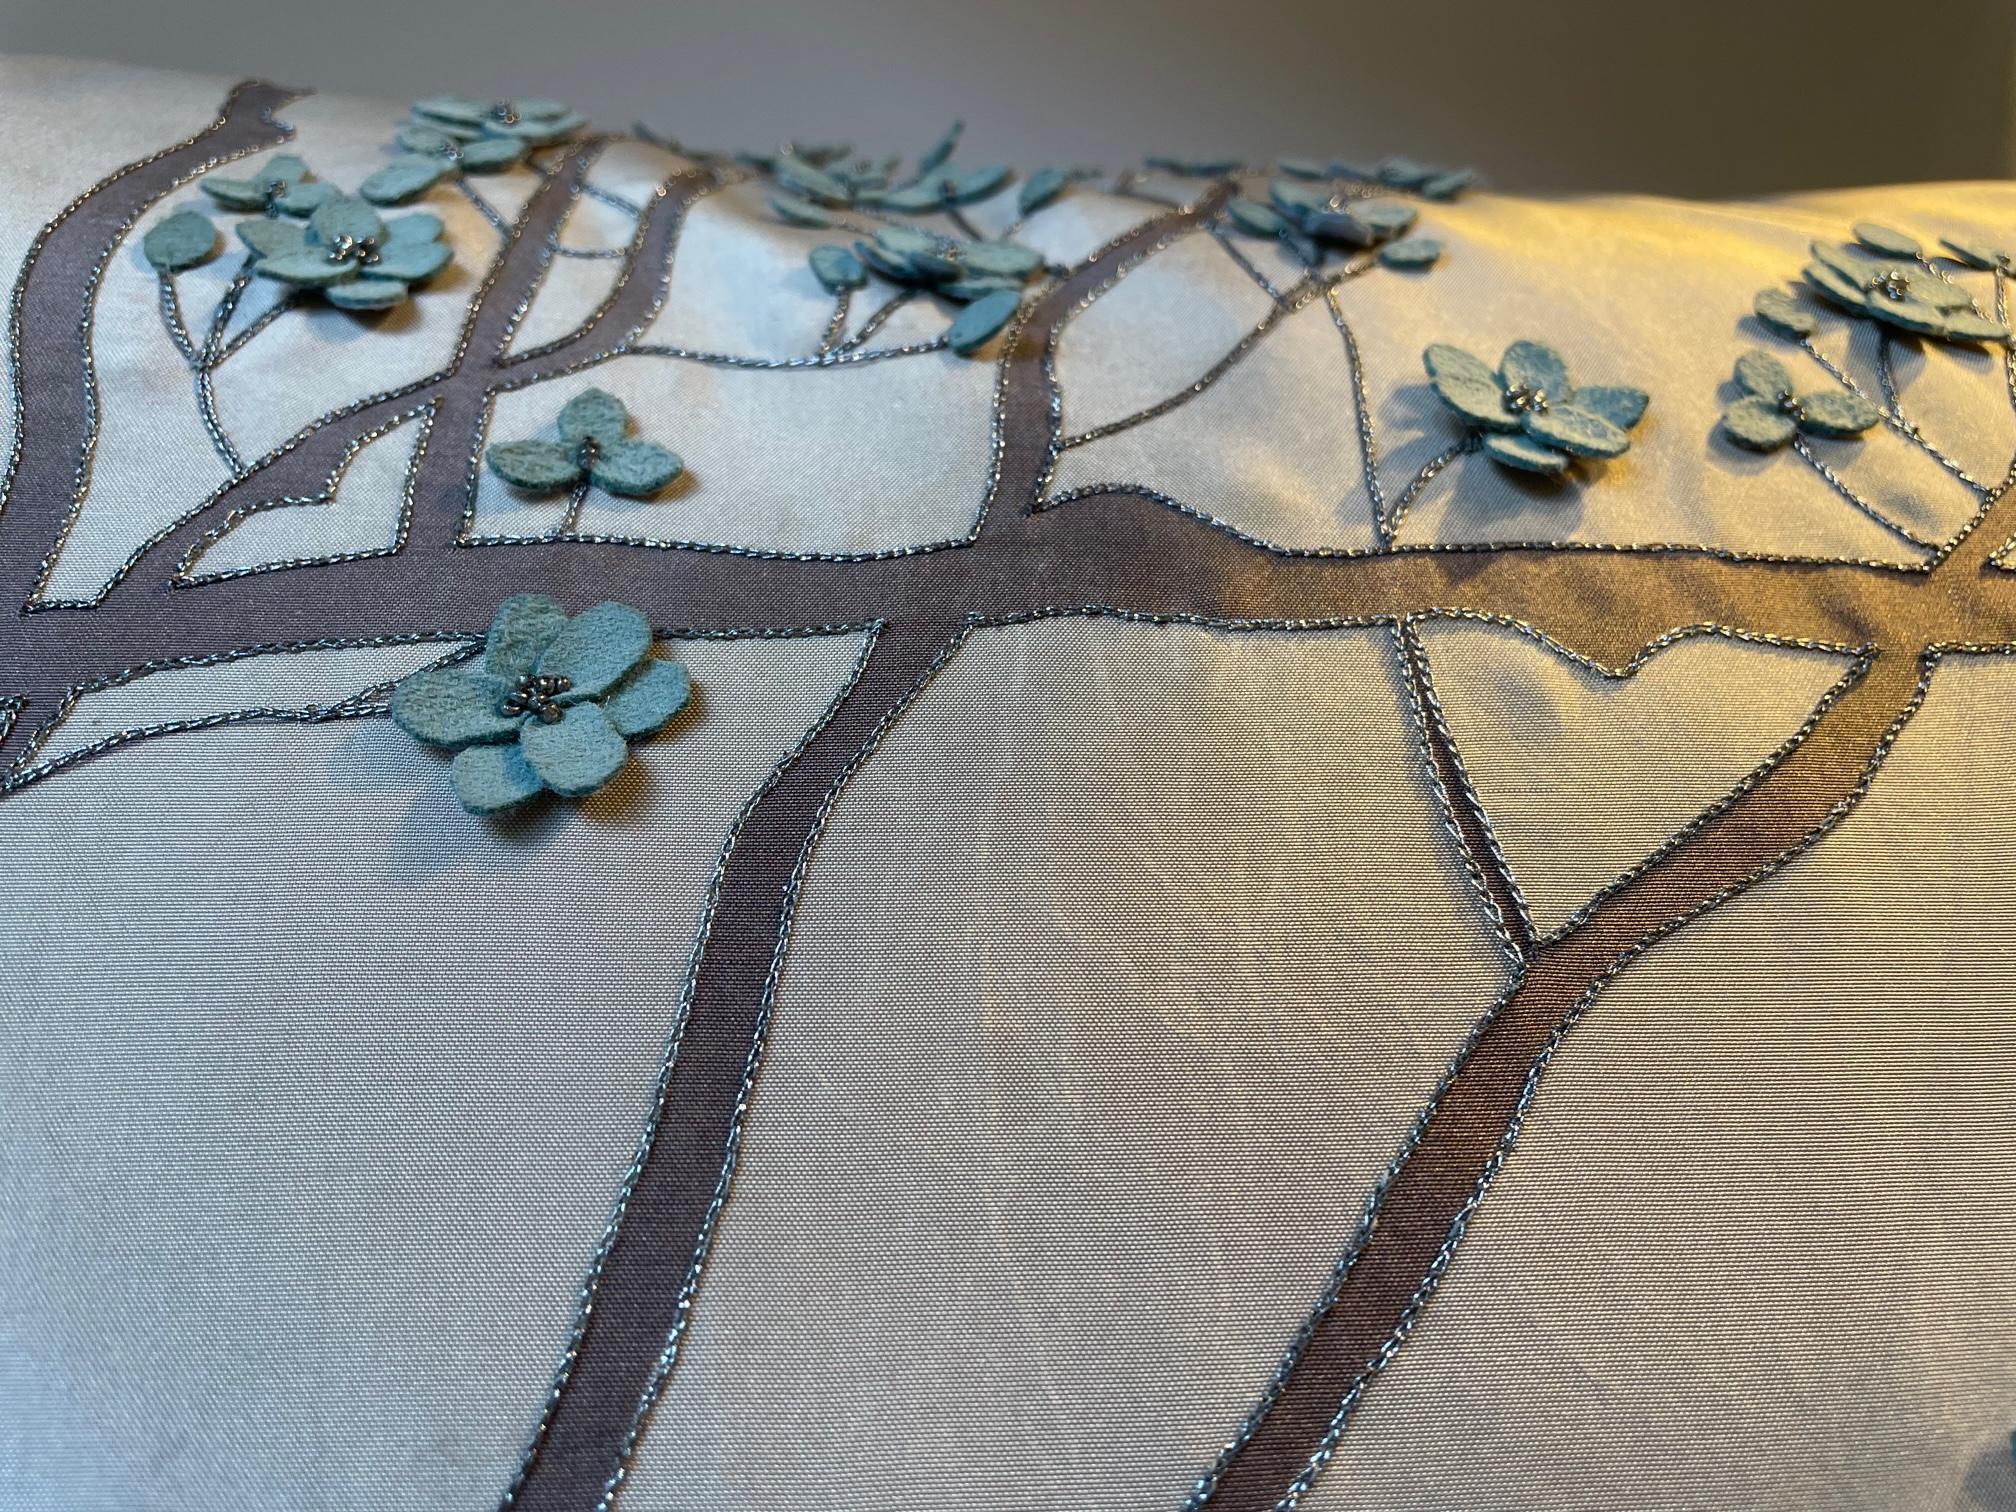 Silk Cushion col. sand with hand embroidery and hand painting, The painted branches have a silver thread hand embroidery outline - the blossoms are made from suede with silver beading, the cushion had been used as showroom sample,
the plain back